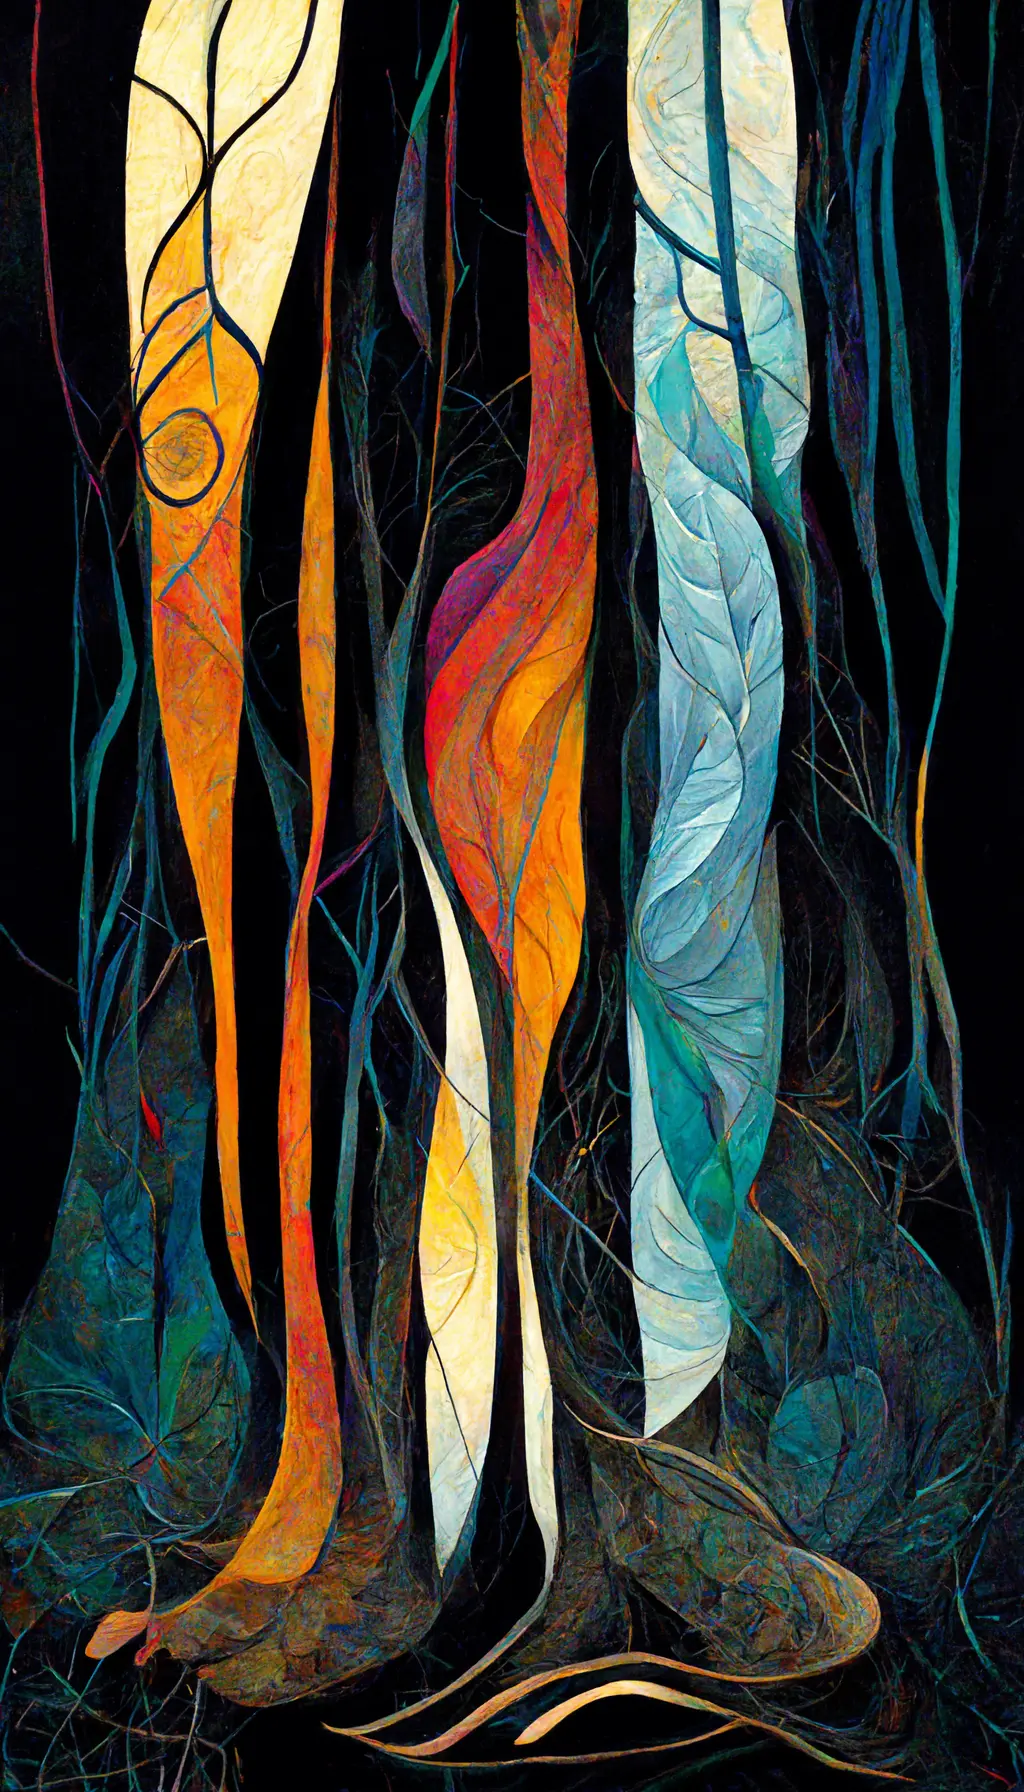 Speaks to the wind, tree branches swaying, teachings from land :: Norval Morrisseau, Norval Morriseau, Christi Belcourt :: layers of abstraction and transparency, flat soft gradients, flowing paint :: sparkles of light, veins of black ---ar 9:16 ---no primary colors